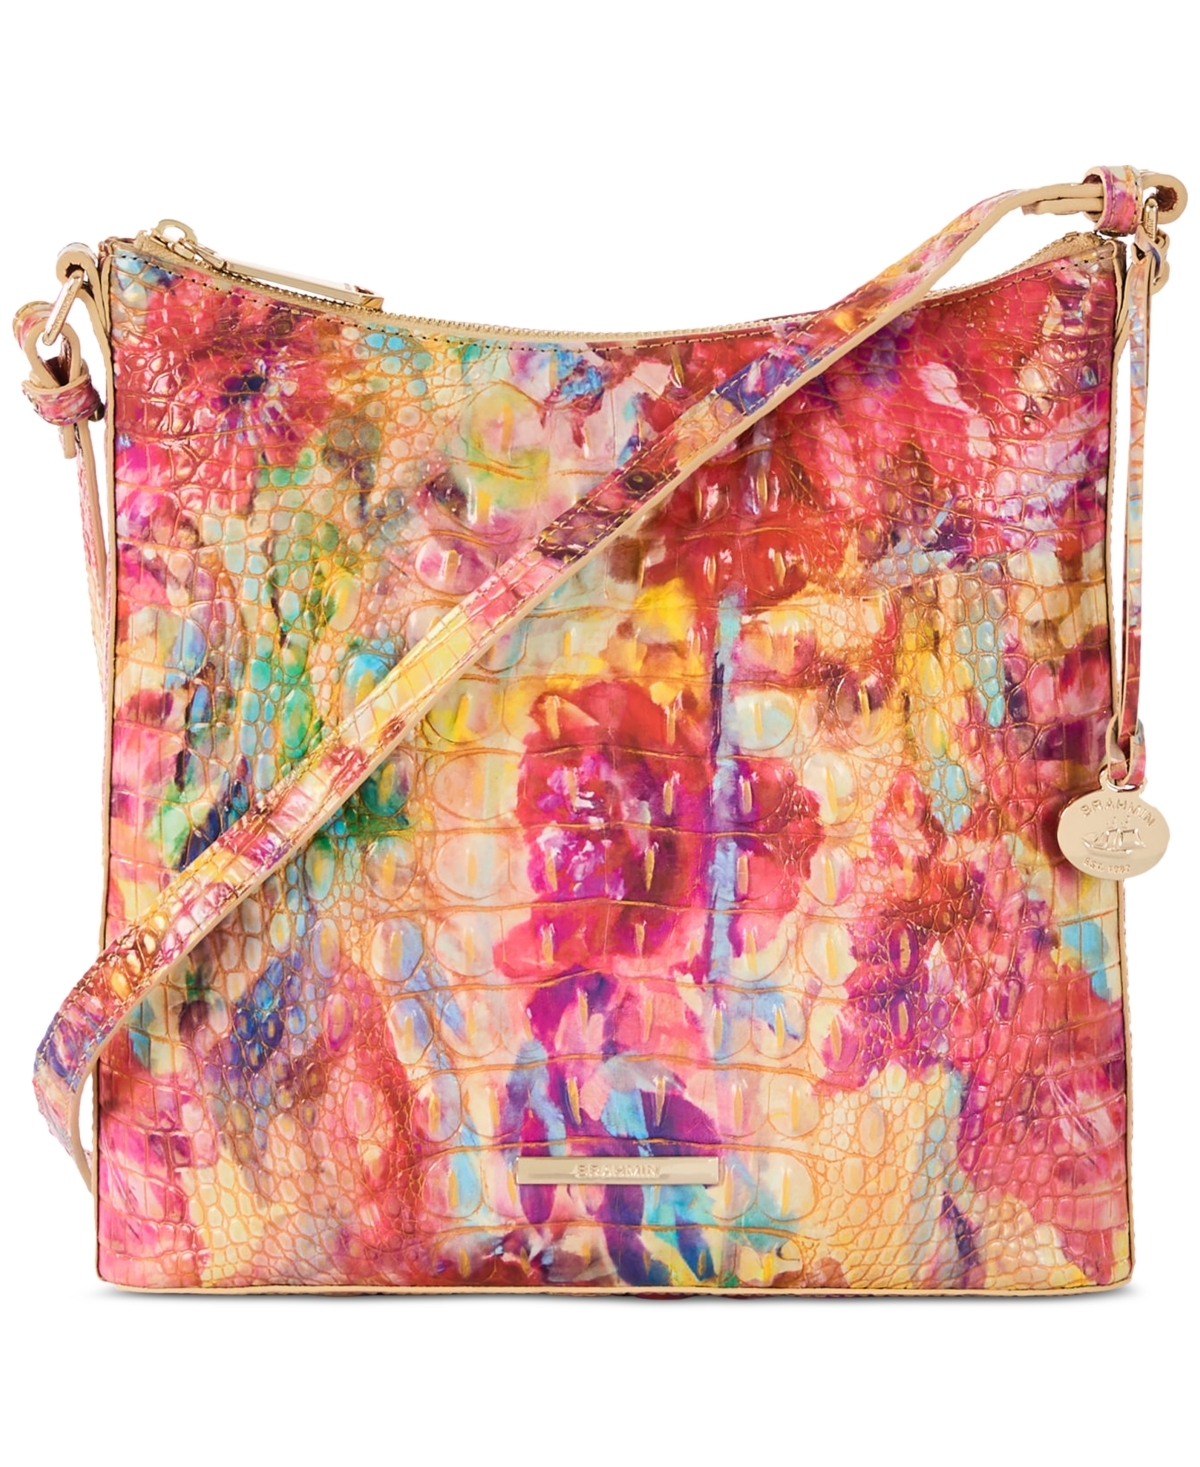 Katie Melbourne Embossed Leather Crossbody - Starlight Ombre Melbourne